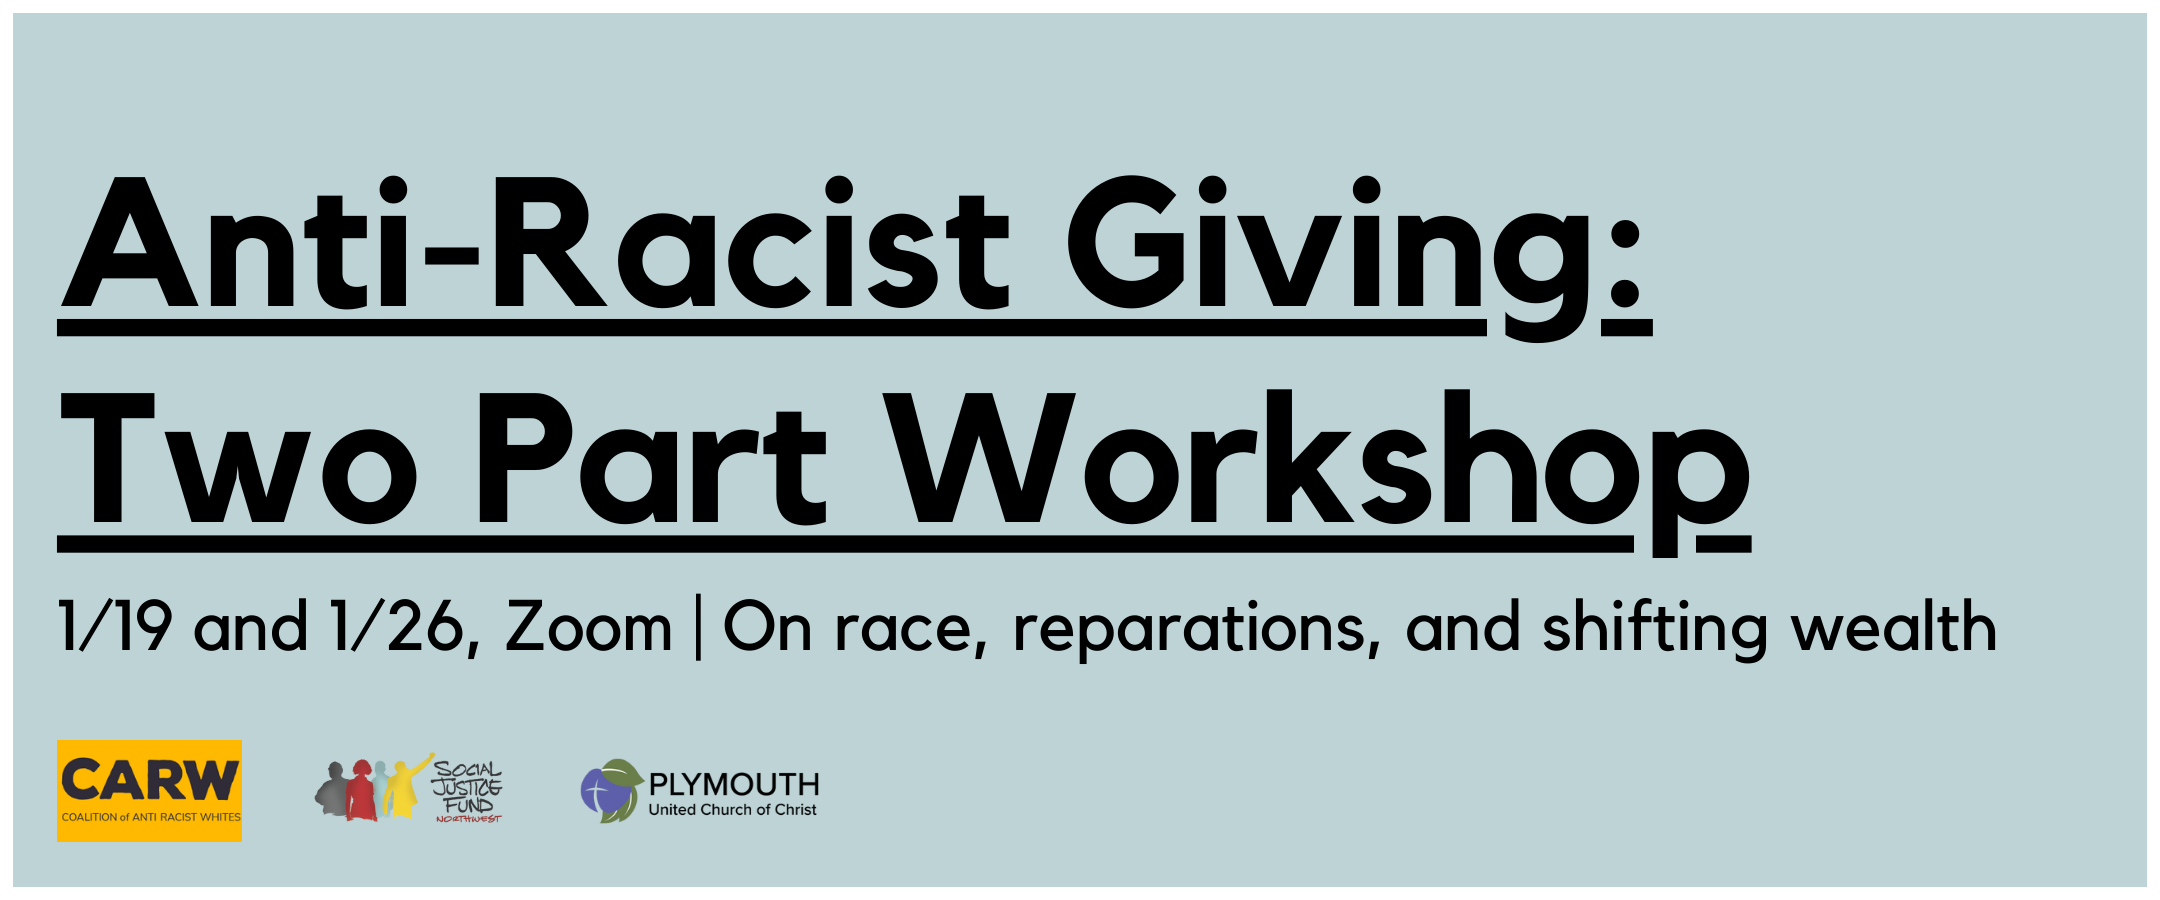 Rectangular banner image with light blue background and white edge outline. Text reads Anti Racist Giving Two Part Workshop. 1.19 and 1.26. Zoom. On race reparations and shifting wealth. The logos of SJF CARW and Plymouth Church are grouped in the bottom left.